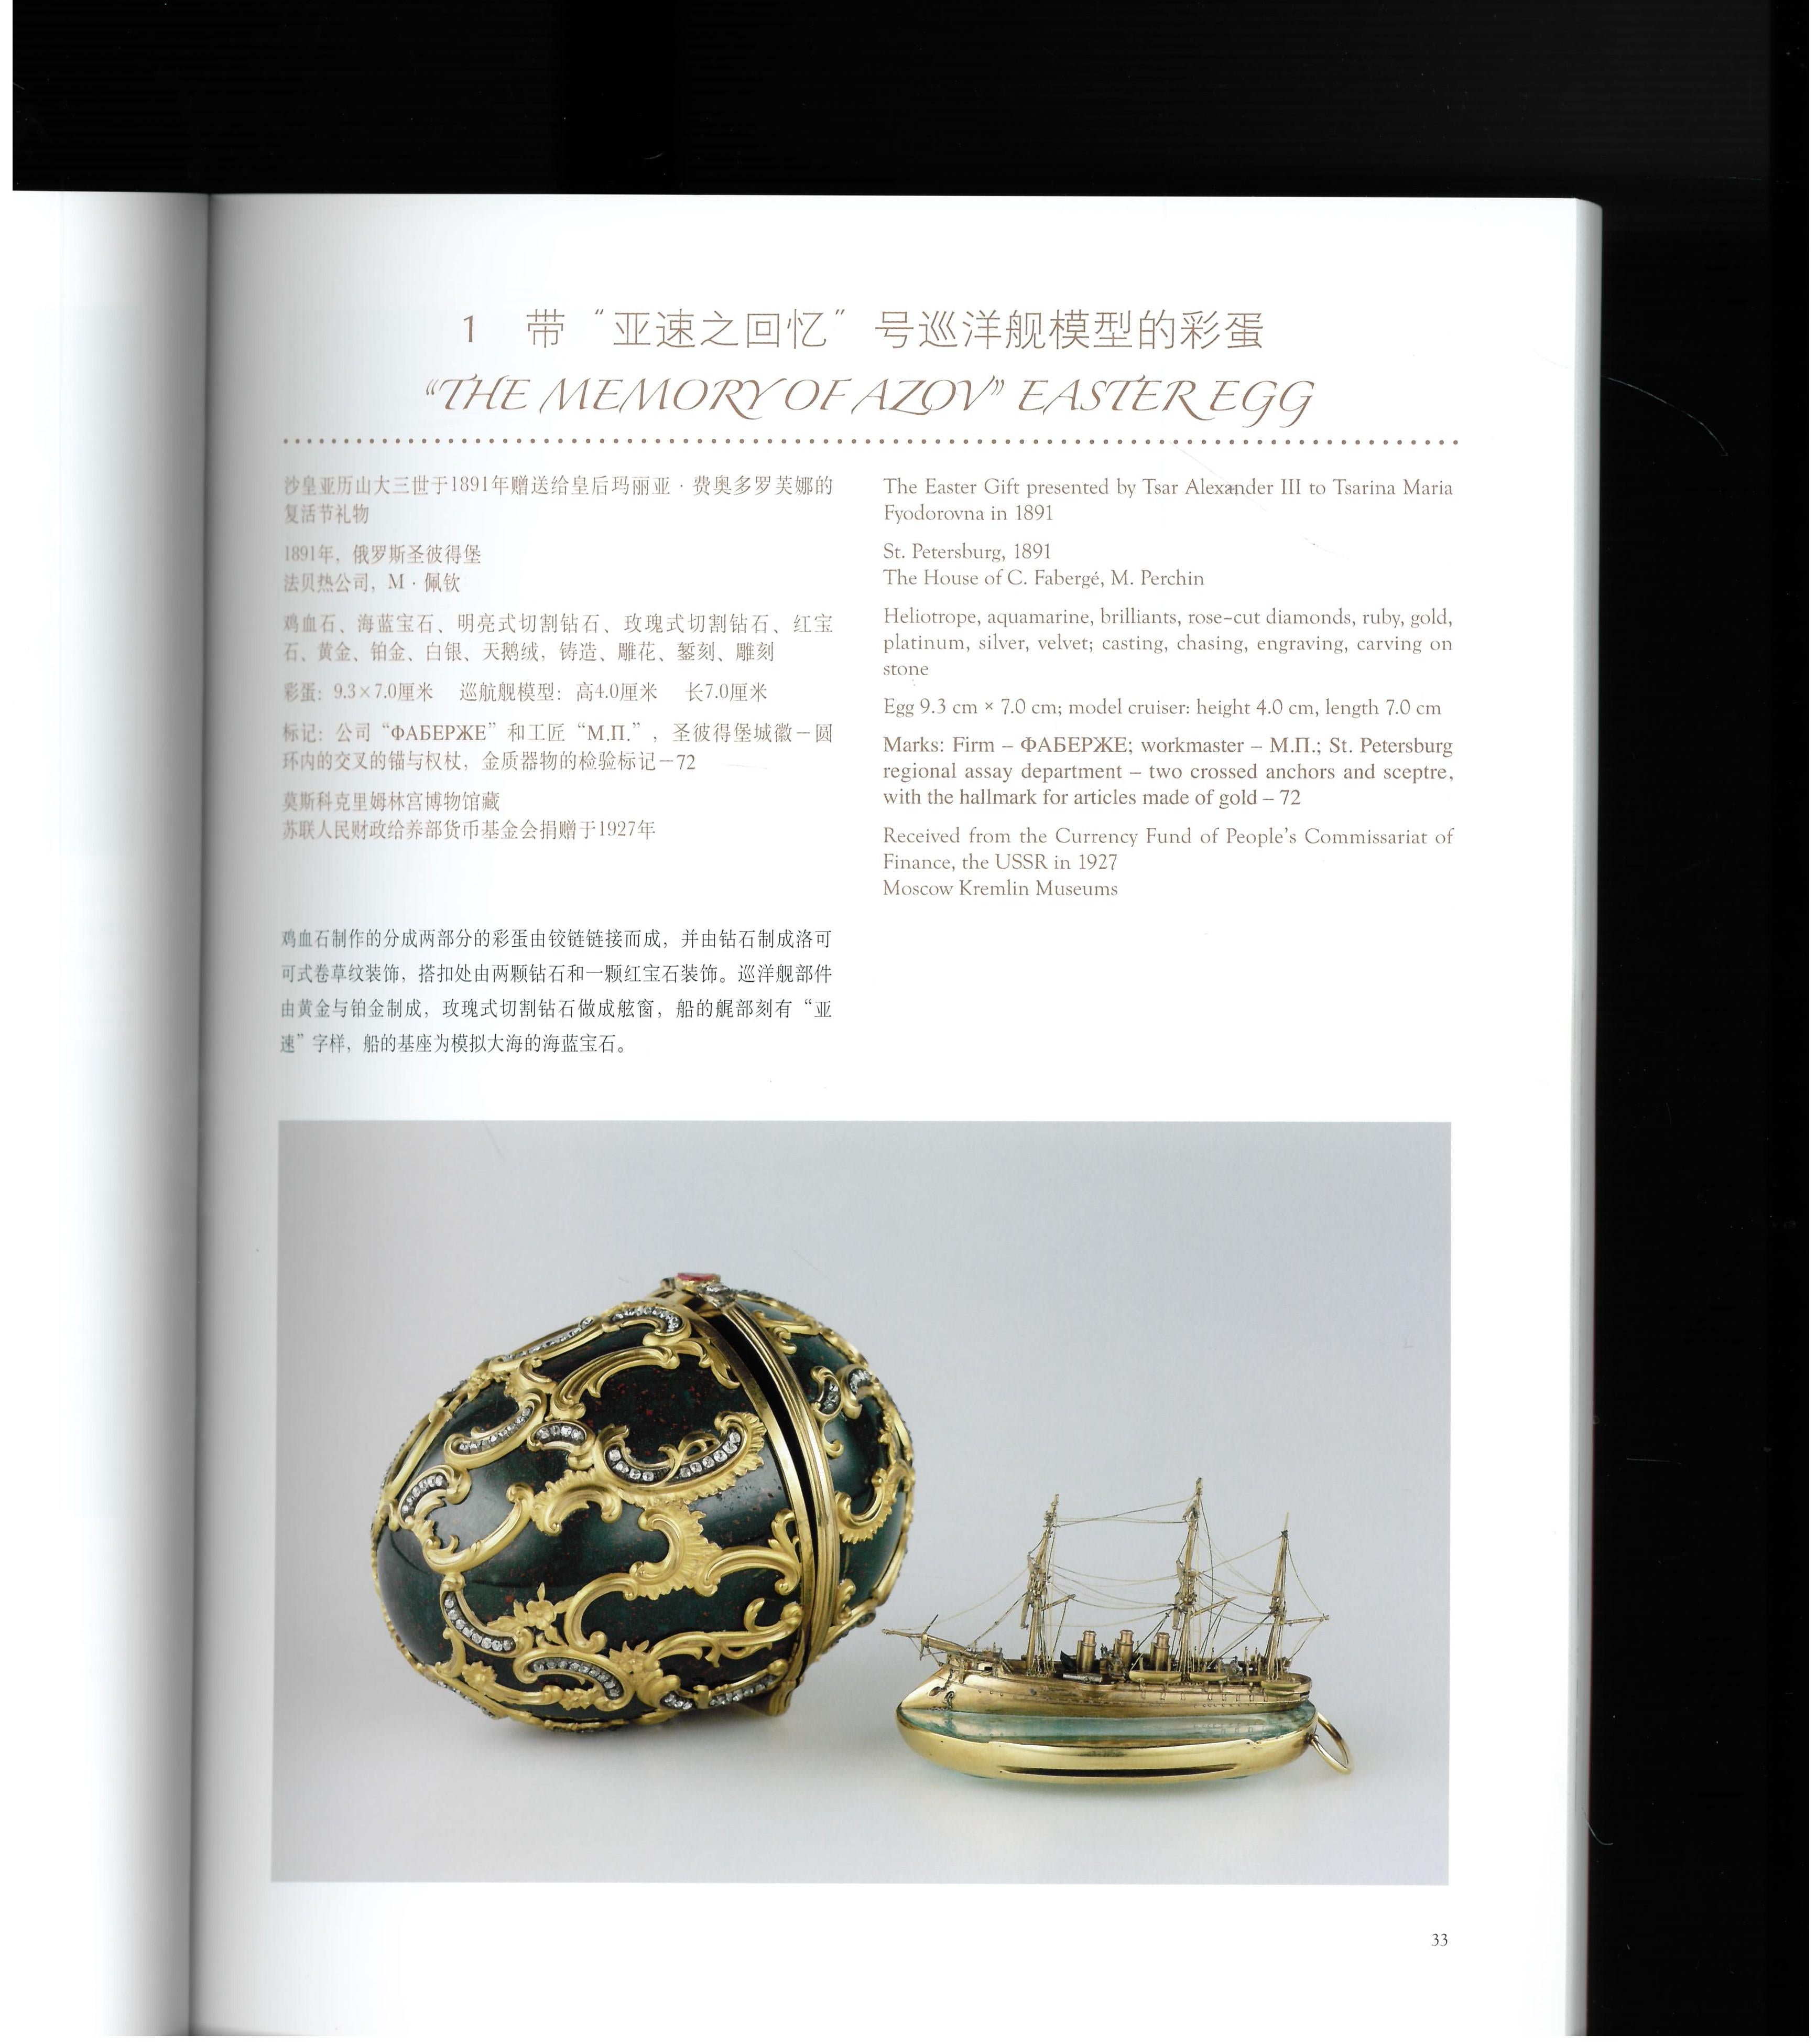 This book is a catalogue of an exhibition of works by the house of Carl Faberge which took place in the Shanghai Museum to celebrate the 170th anniversary of the House of Carl Faberge. As well as supplying the Russian Imperial family  - most notably